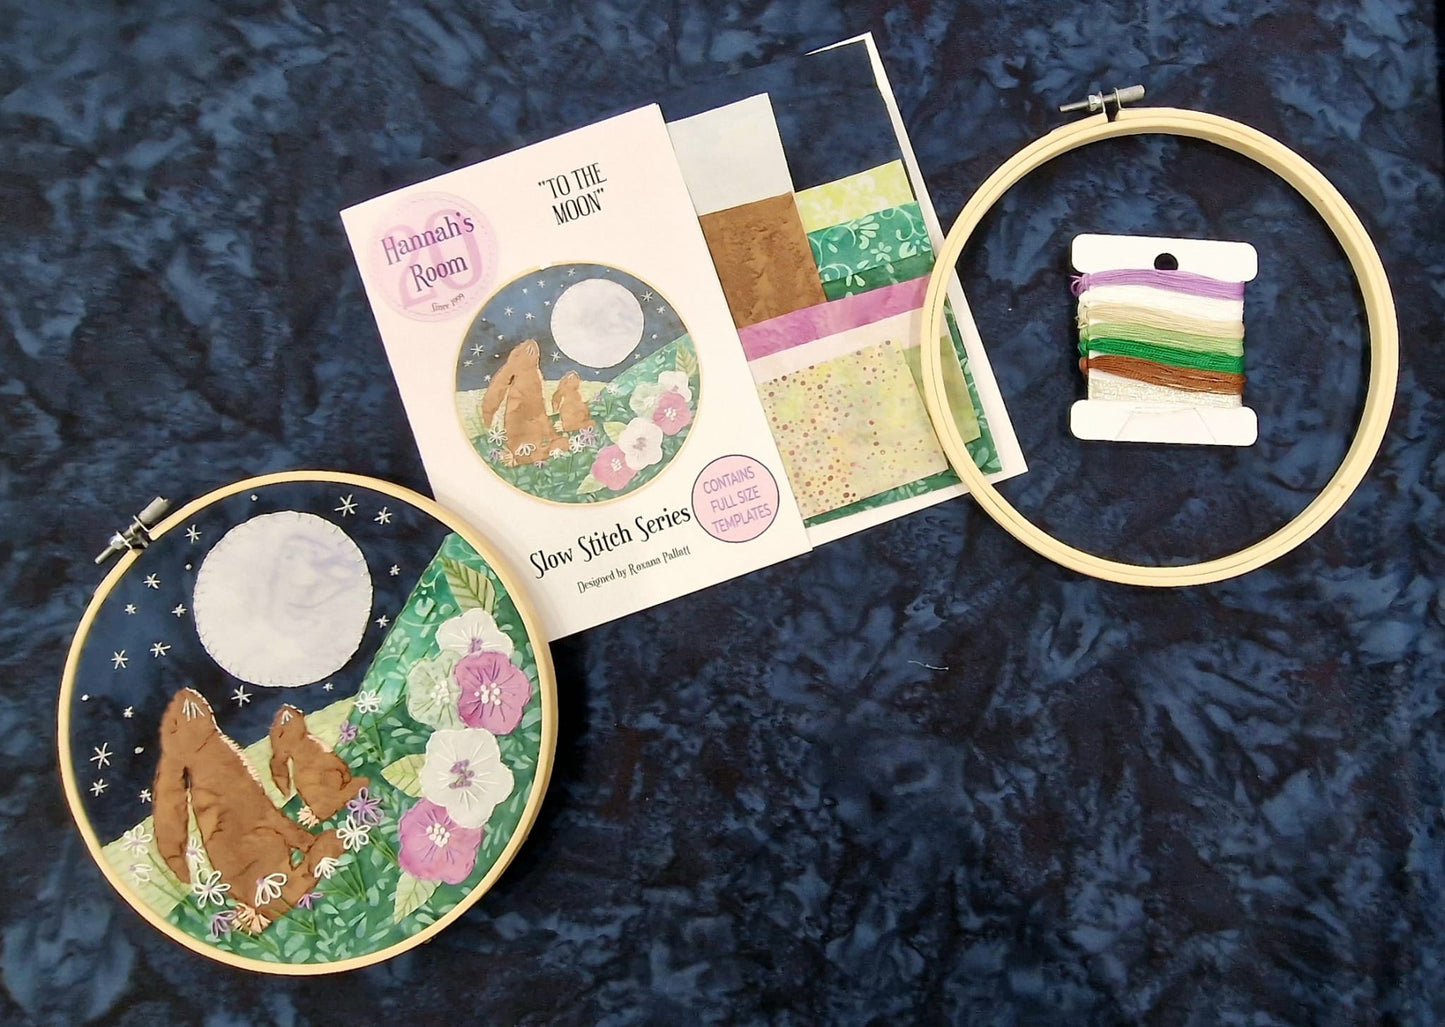 To the Moon - Slow Stitch Kit